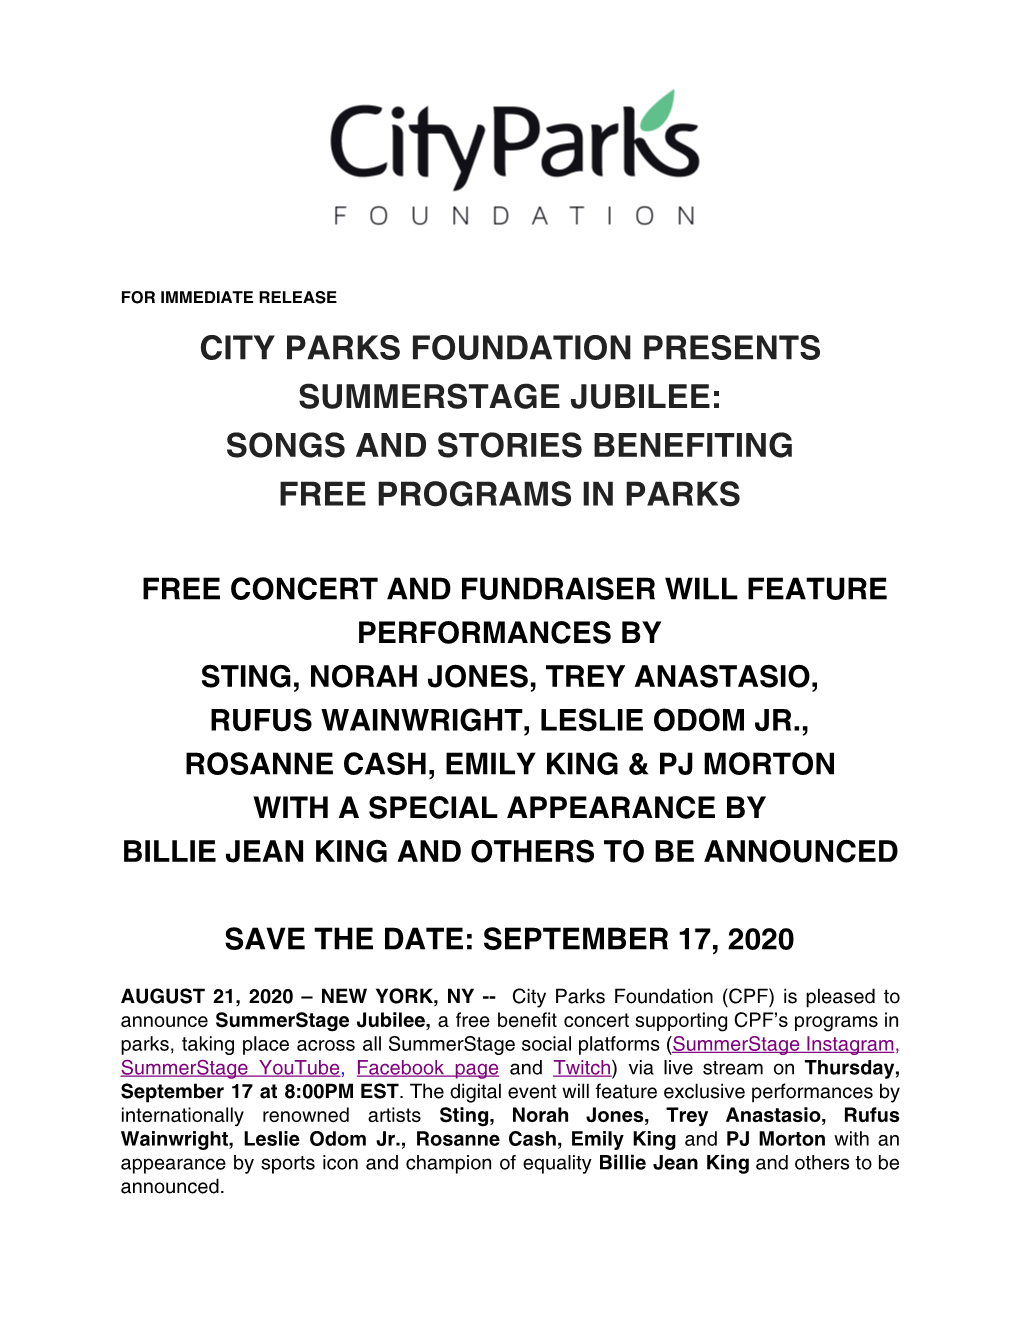 City Parks Foundation Presents Summerstage Jubilee: Songs and Stories Benefiting Free Programs in Parks